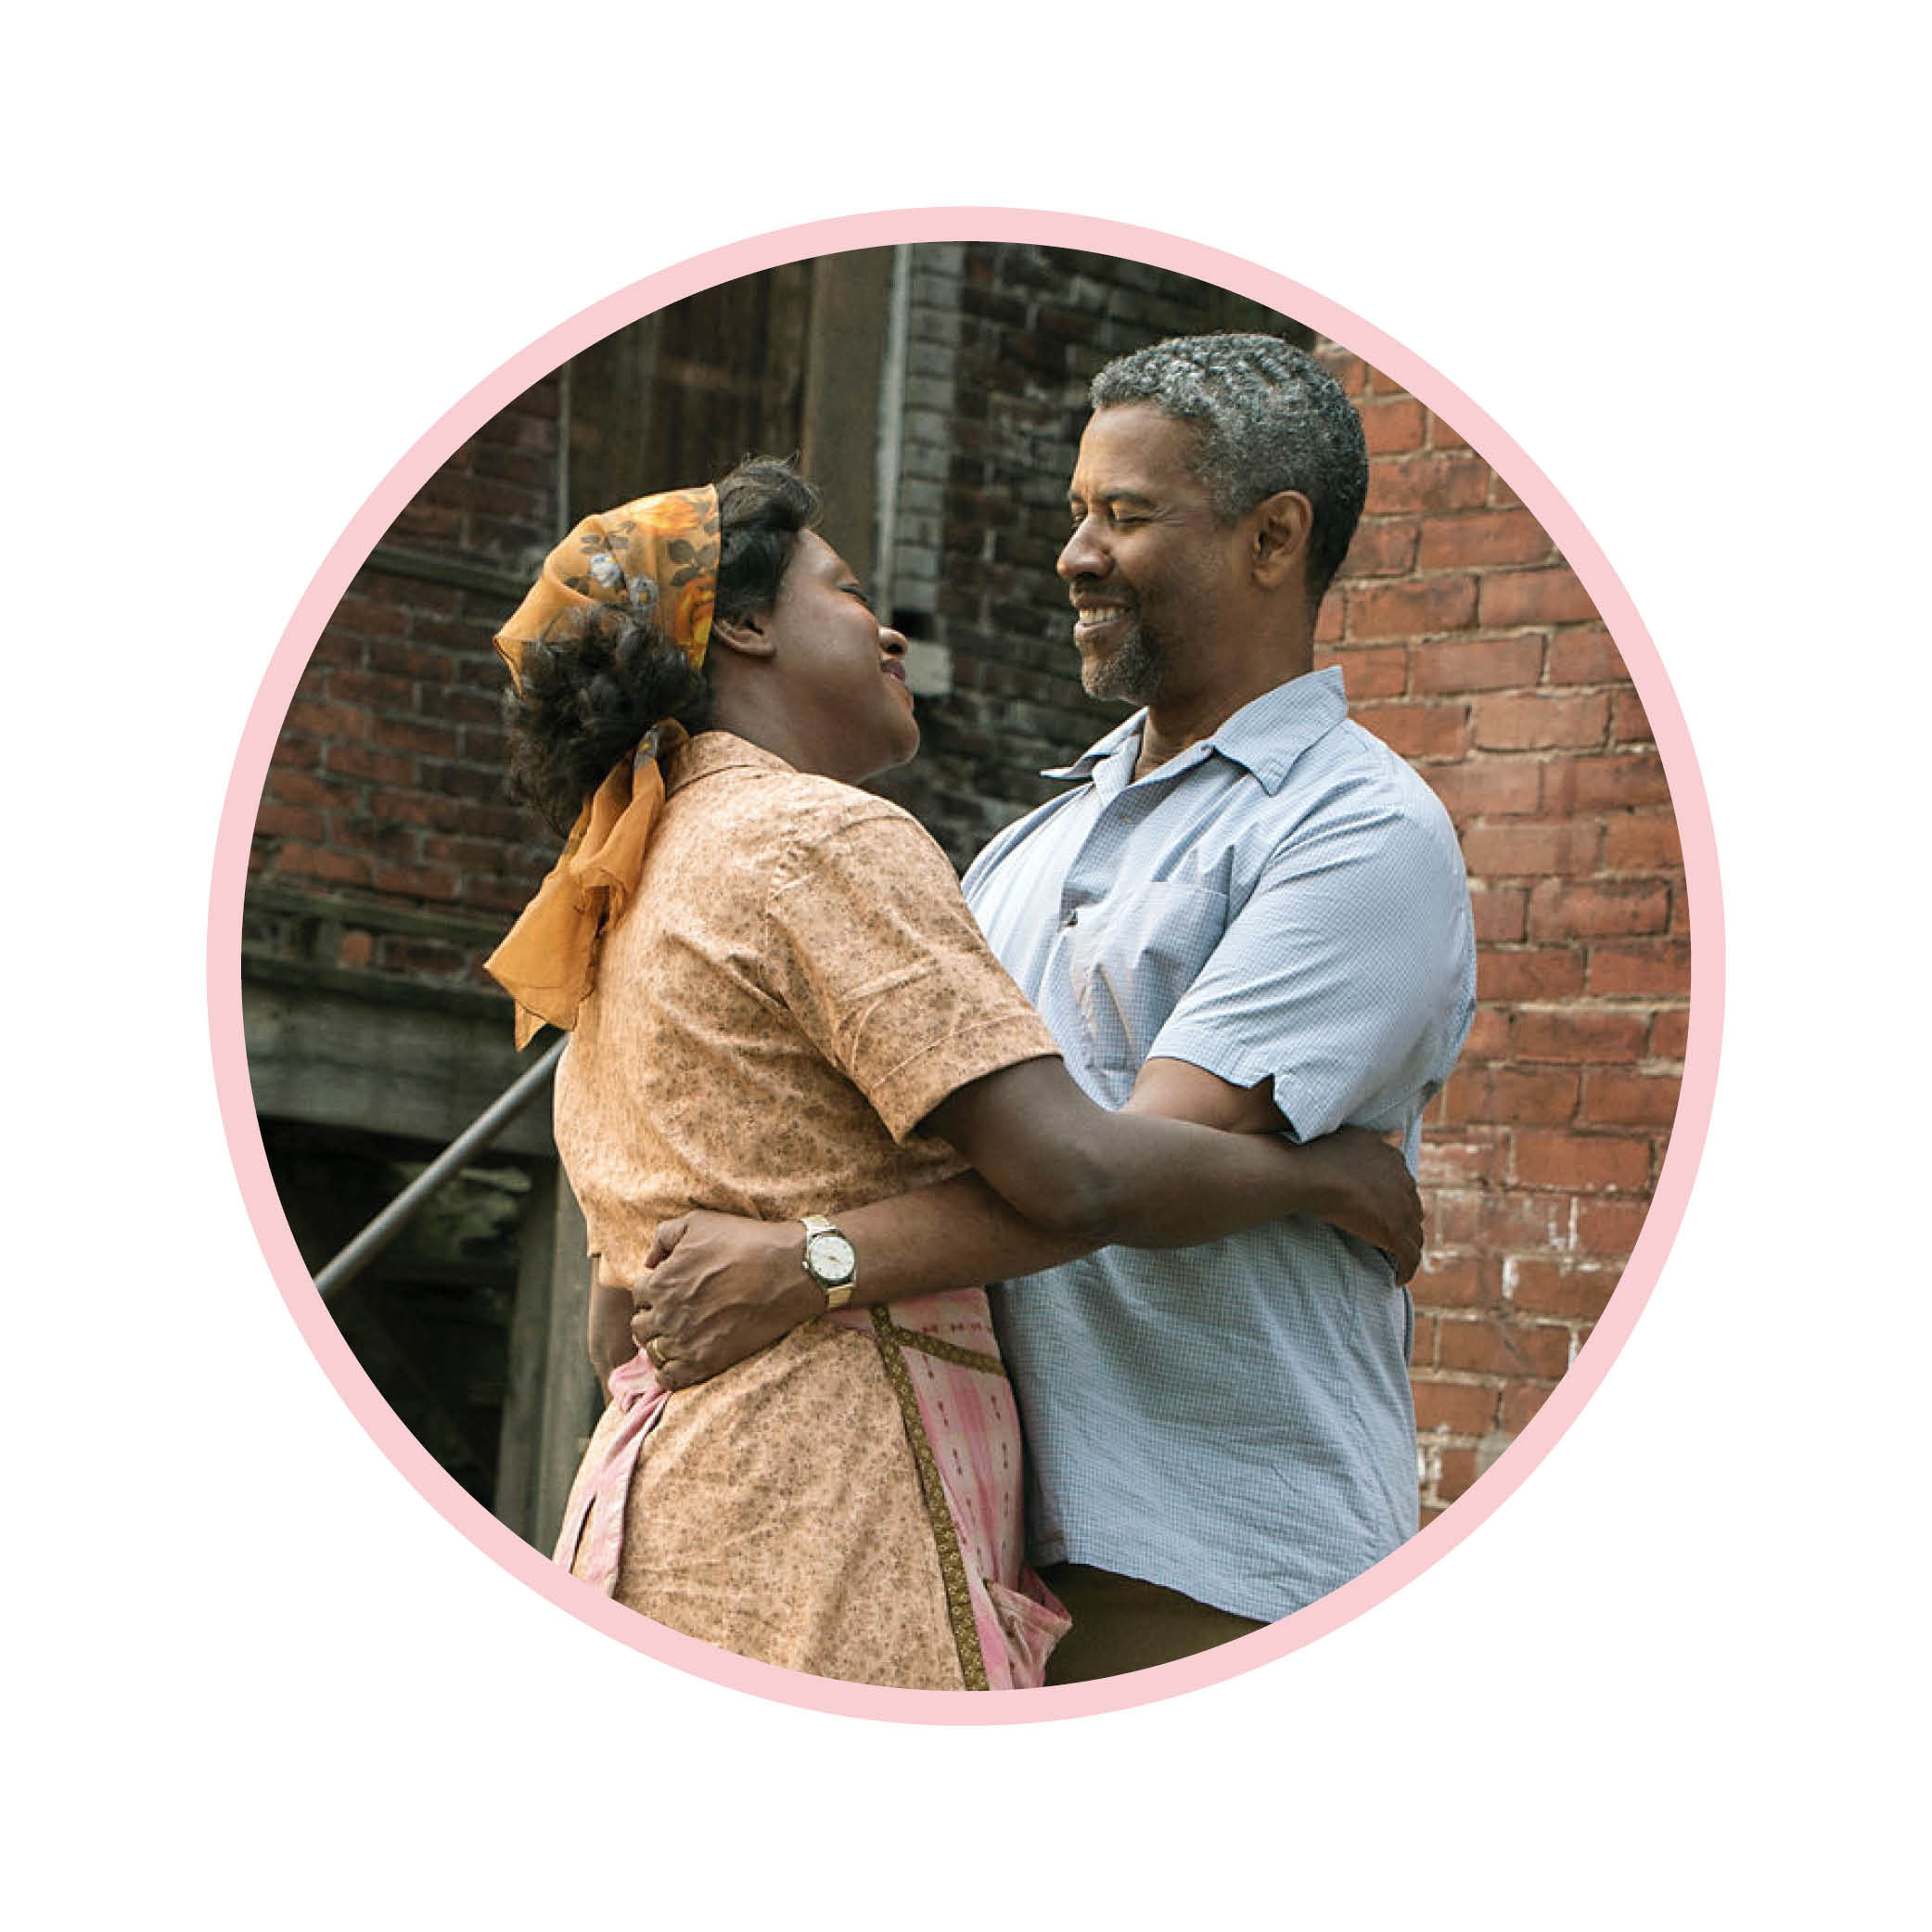 Fences The 2016 film produced, directed and starring Denzel Washington was an award season hit. Set in 1950's Pittsburg, the adaption of the Pulitzer winning play is beautifully executed and emotive watch.